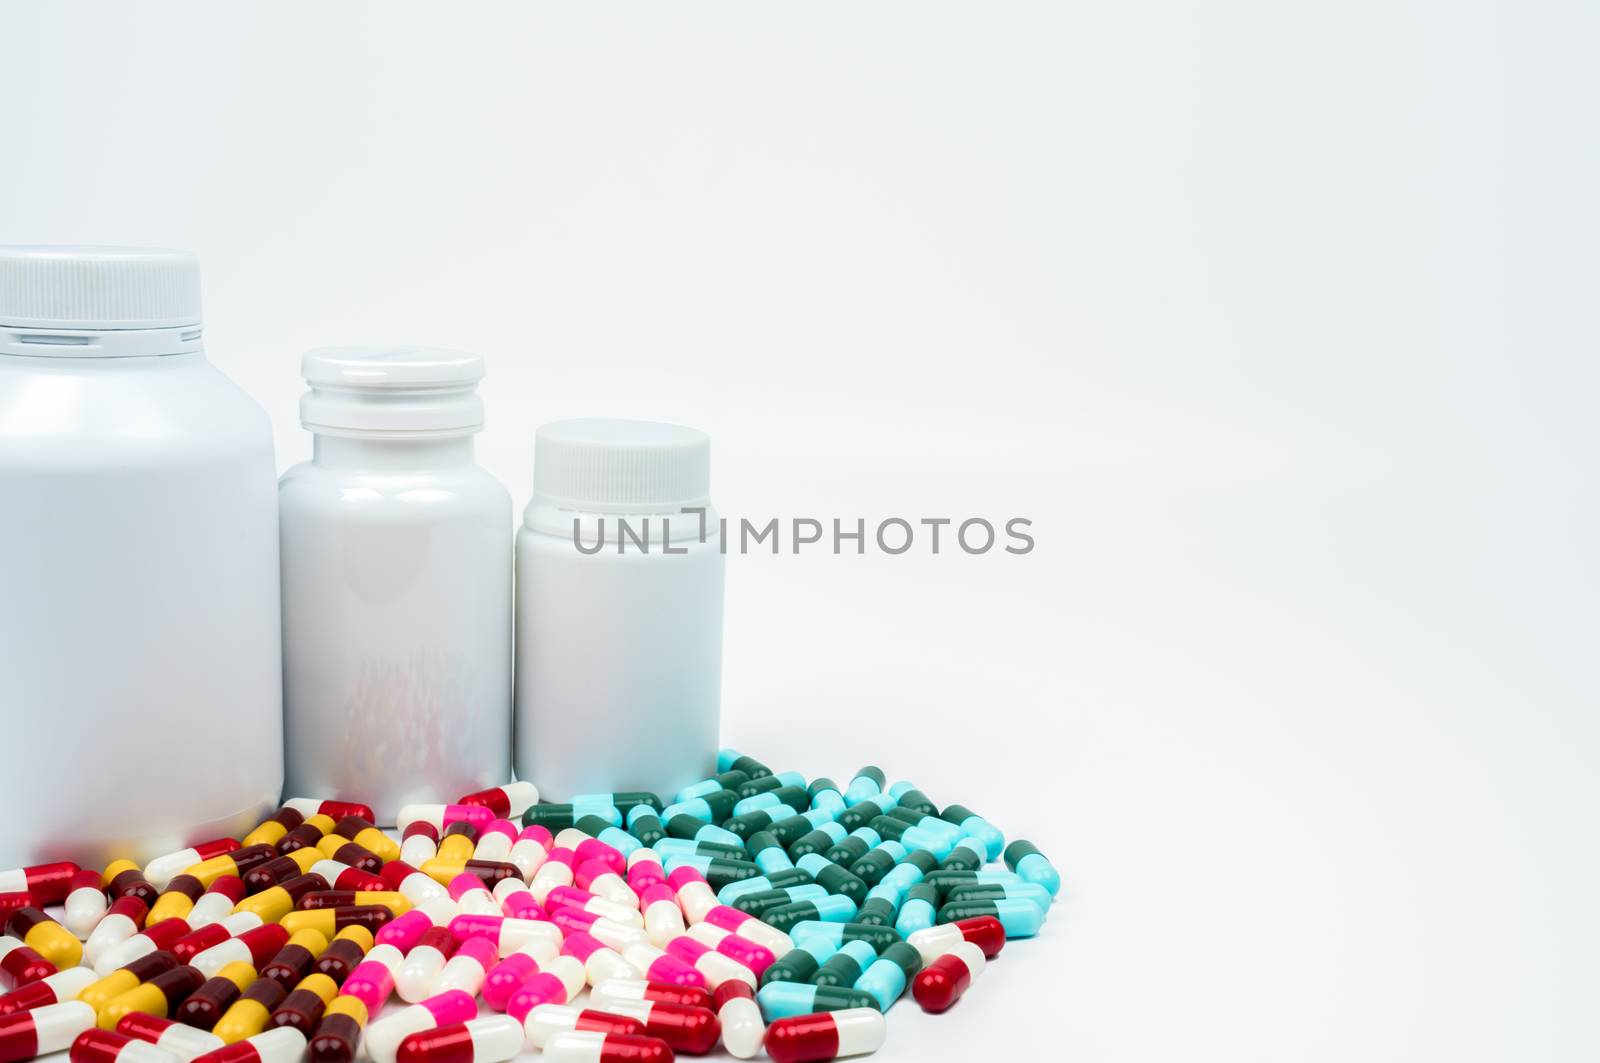 Antibiotic capsules pills and plastic bottle with blank label isolated on white background with copy space. Drug resistance concept. Antibiotics drug use with reasonable and global healthcare concept. Pharmaceutical industry. Health budgets and policy.